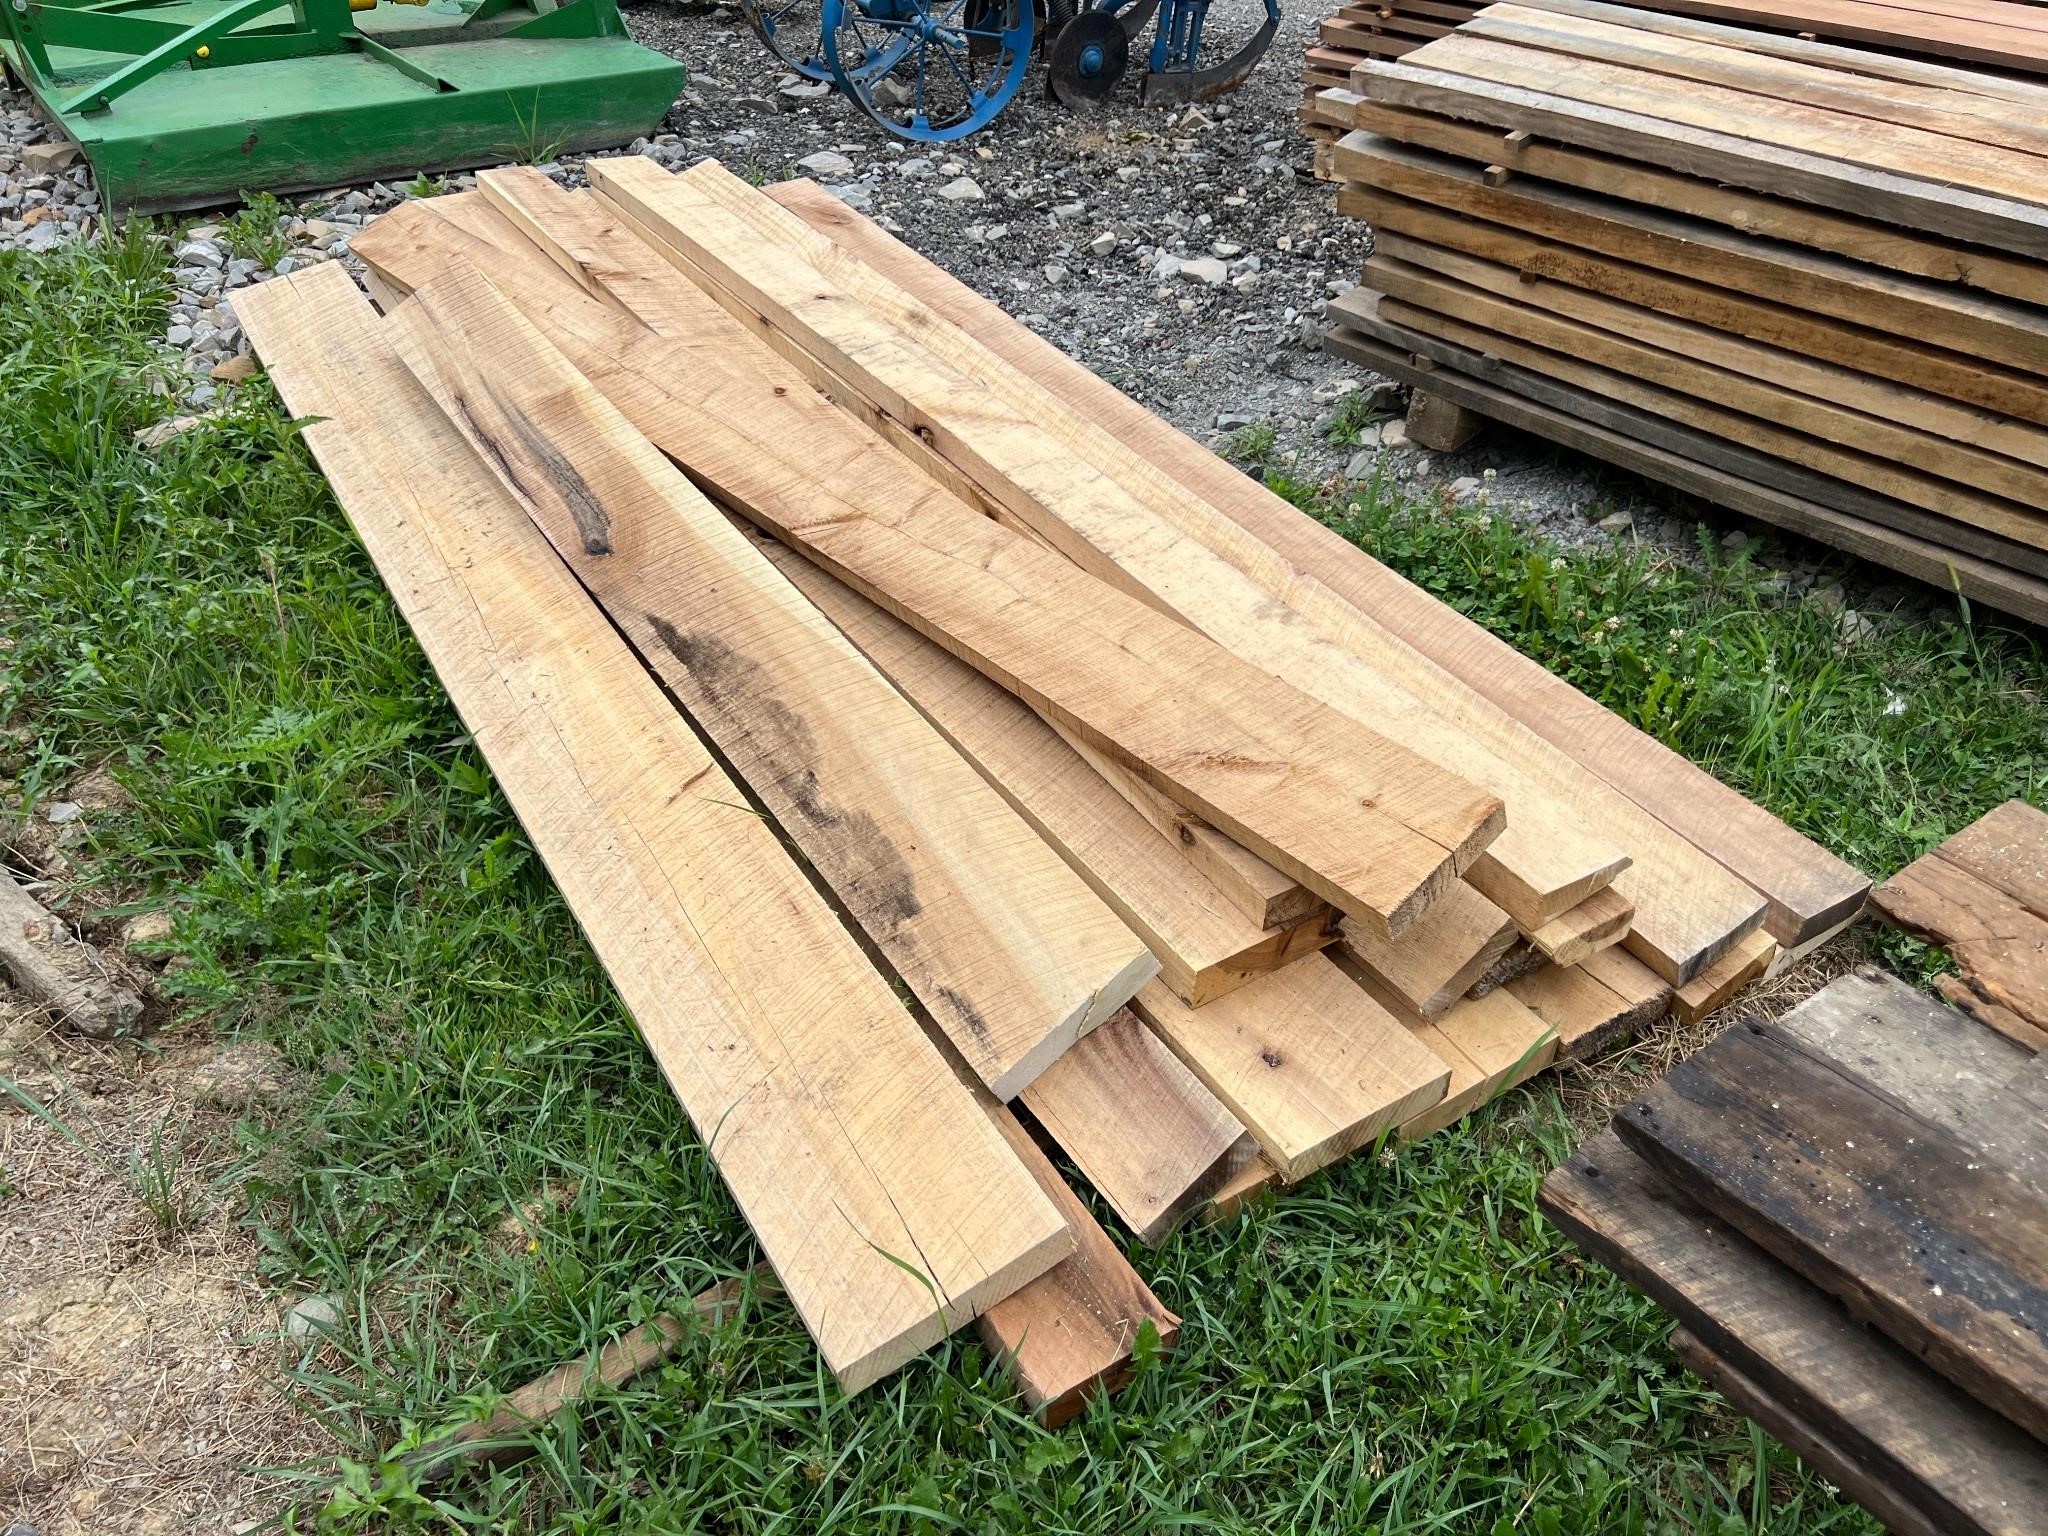 Quantity of 2" Trailer Decking 10 Foot Sections